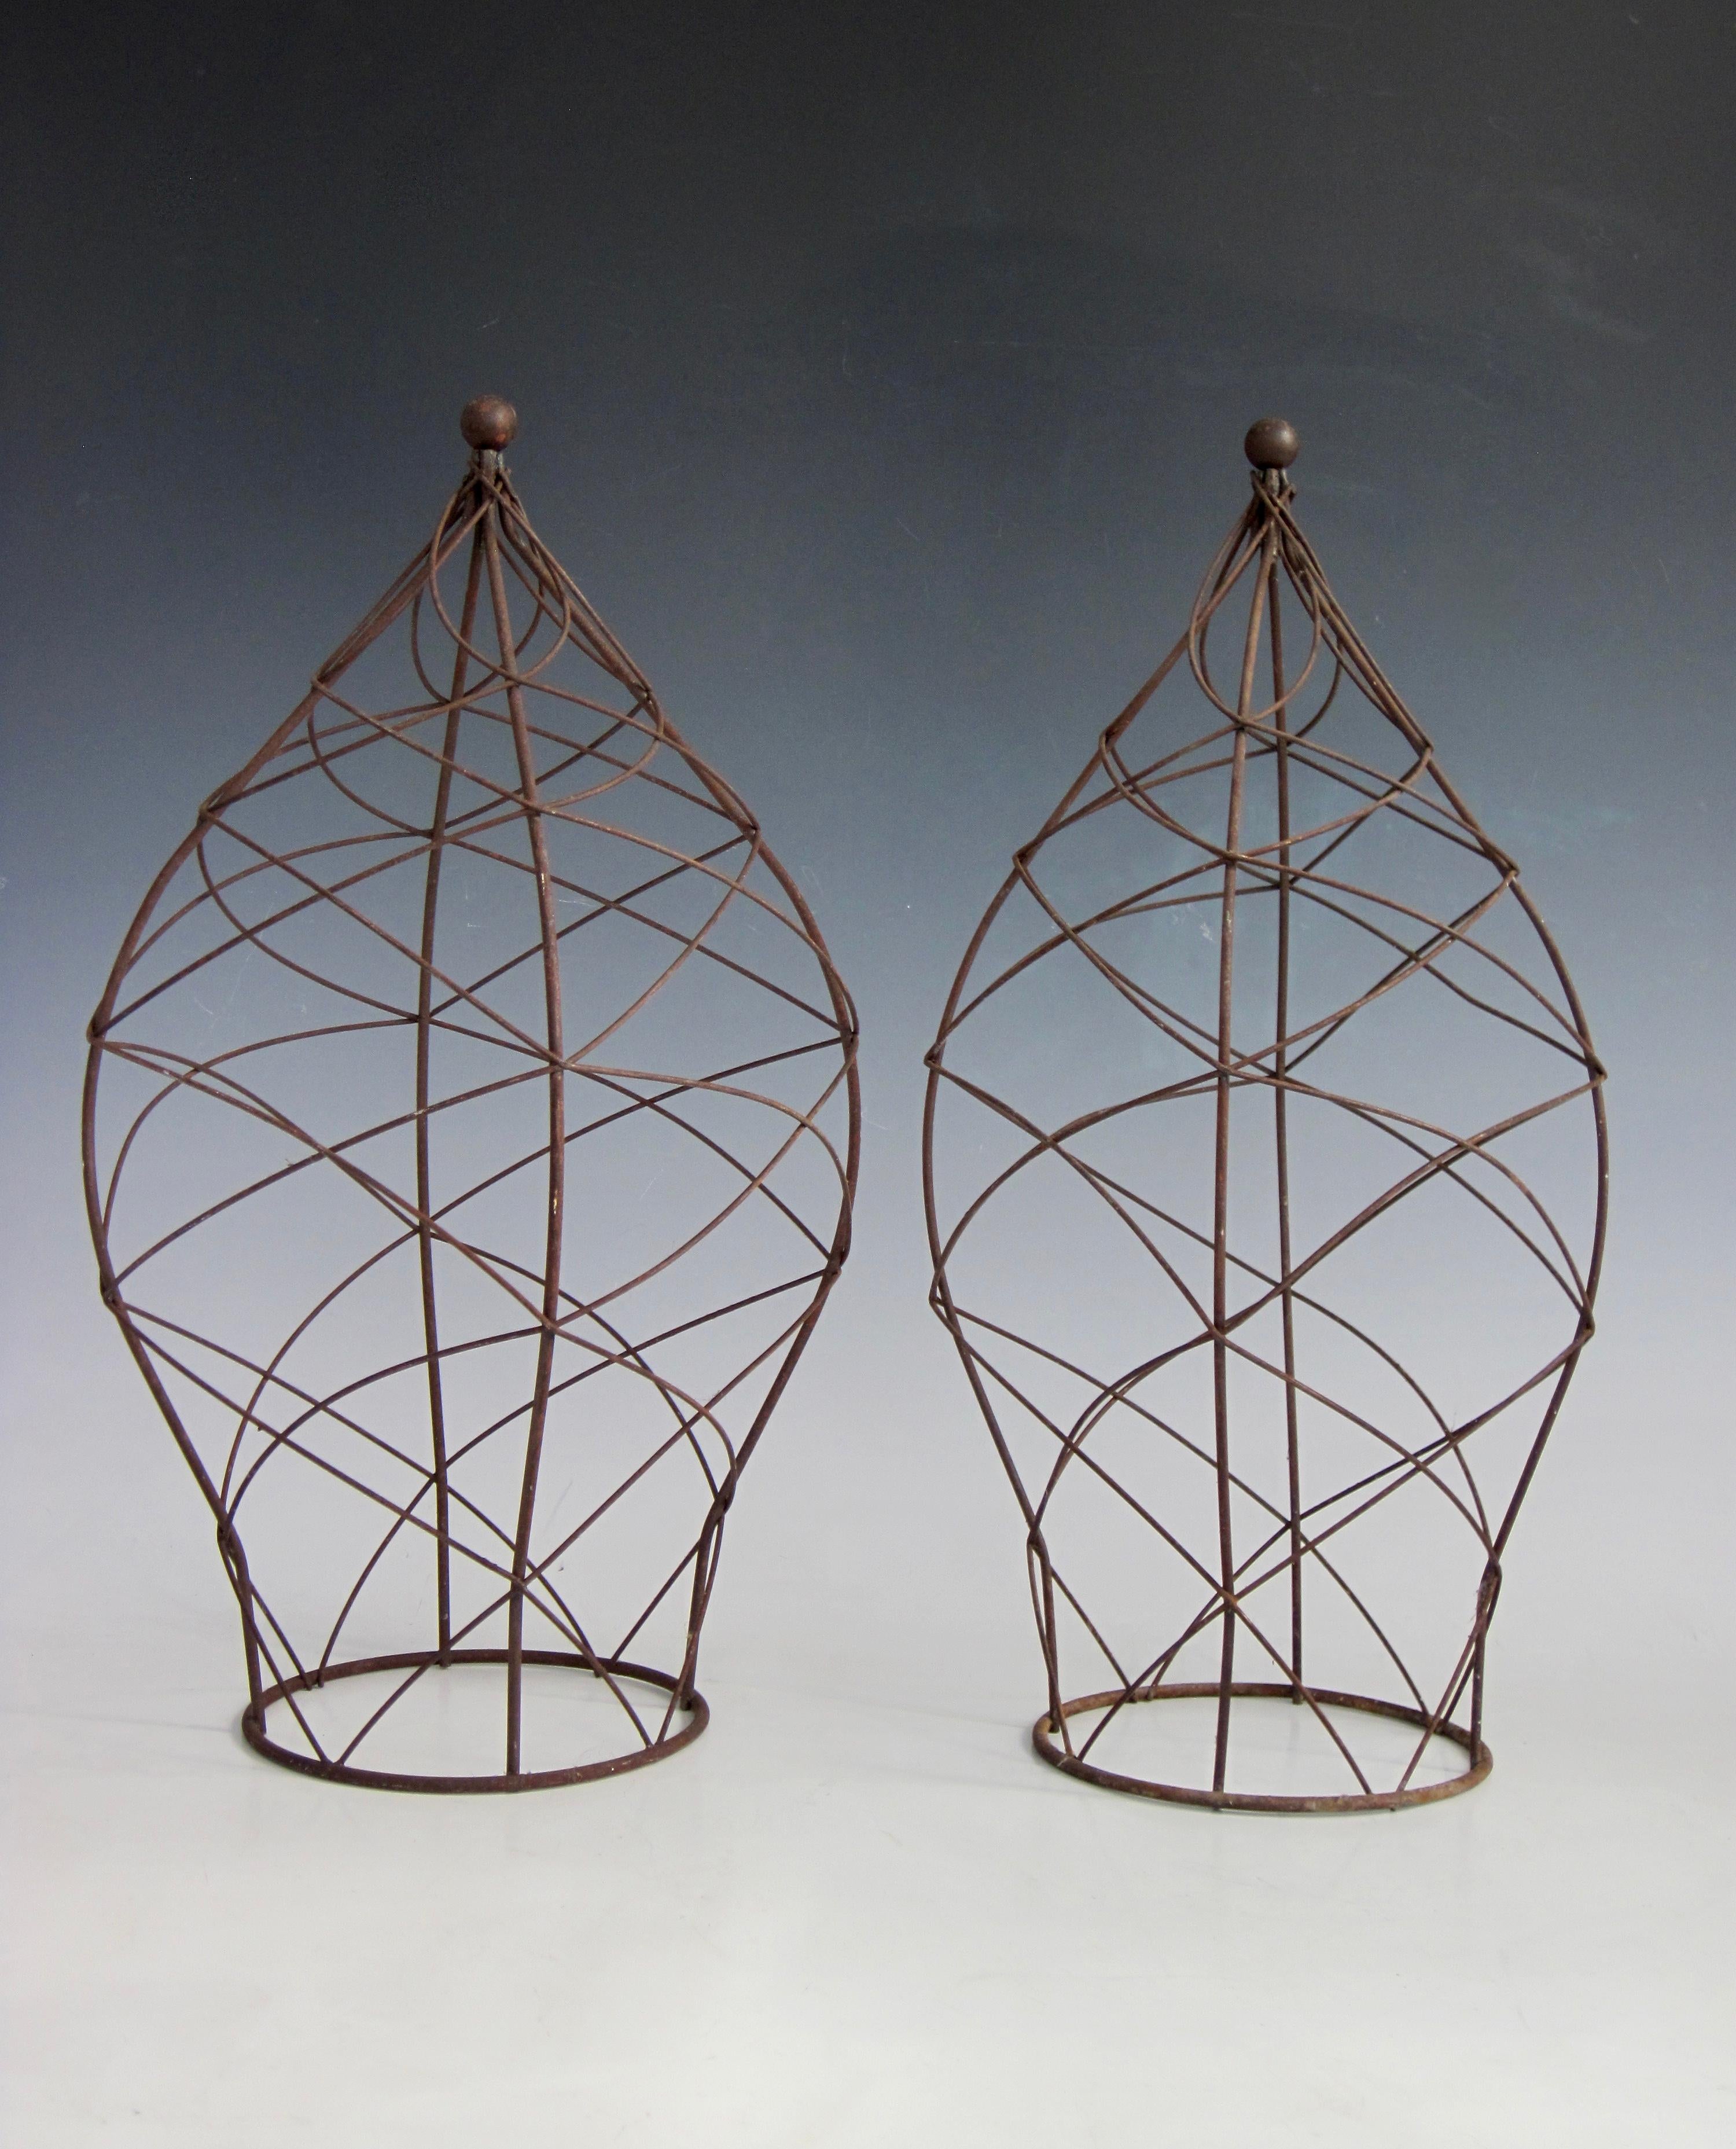 Pair of metal garden topiaries with spiraling trails on an hourglass type shape leading to a peak with a round ball finial. Nicely patina'd and structurally sound.
One measures 18.25